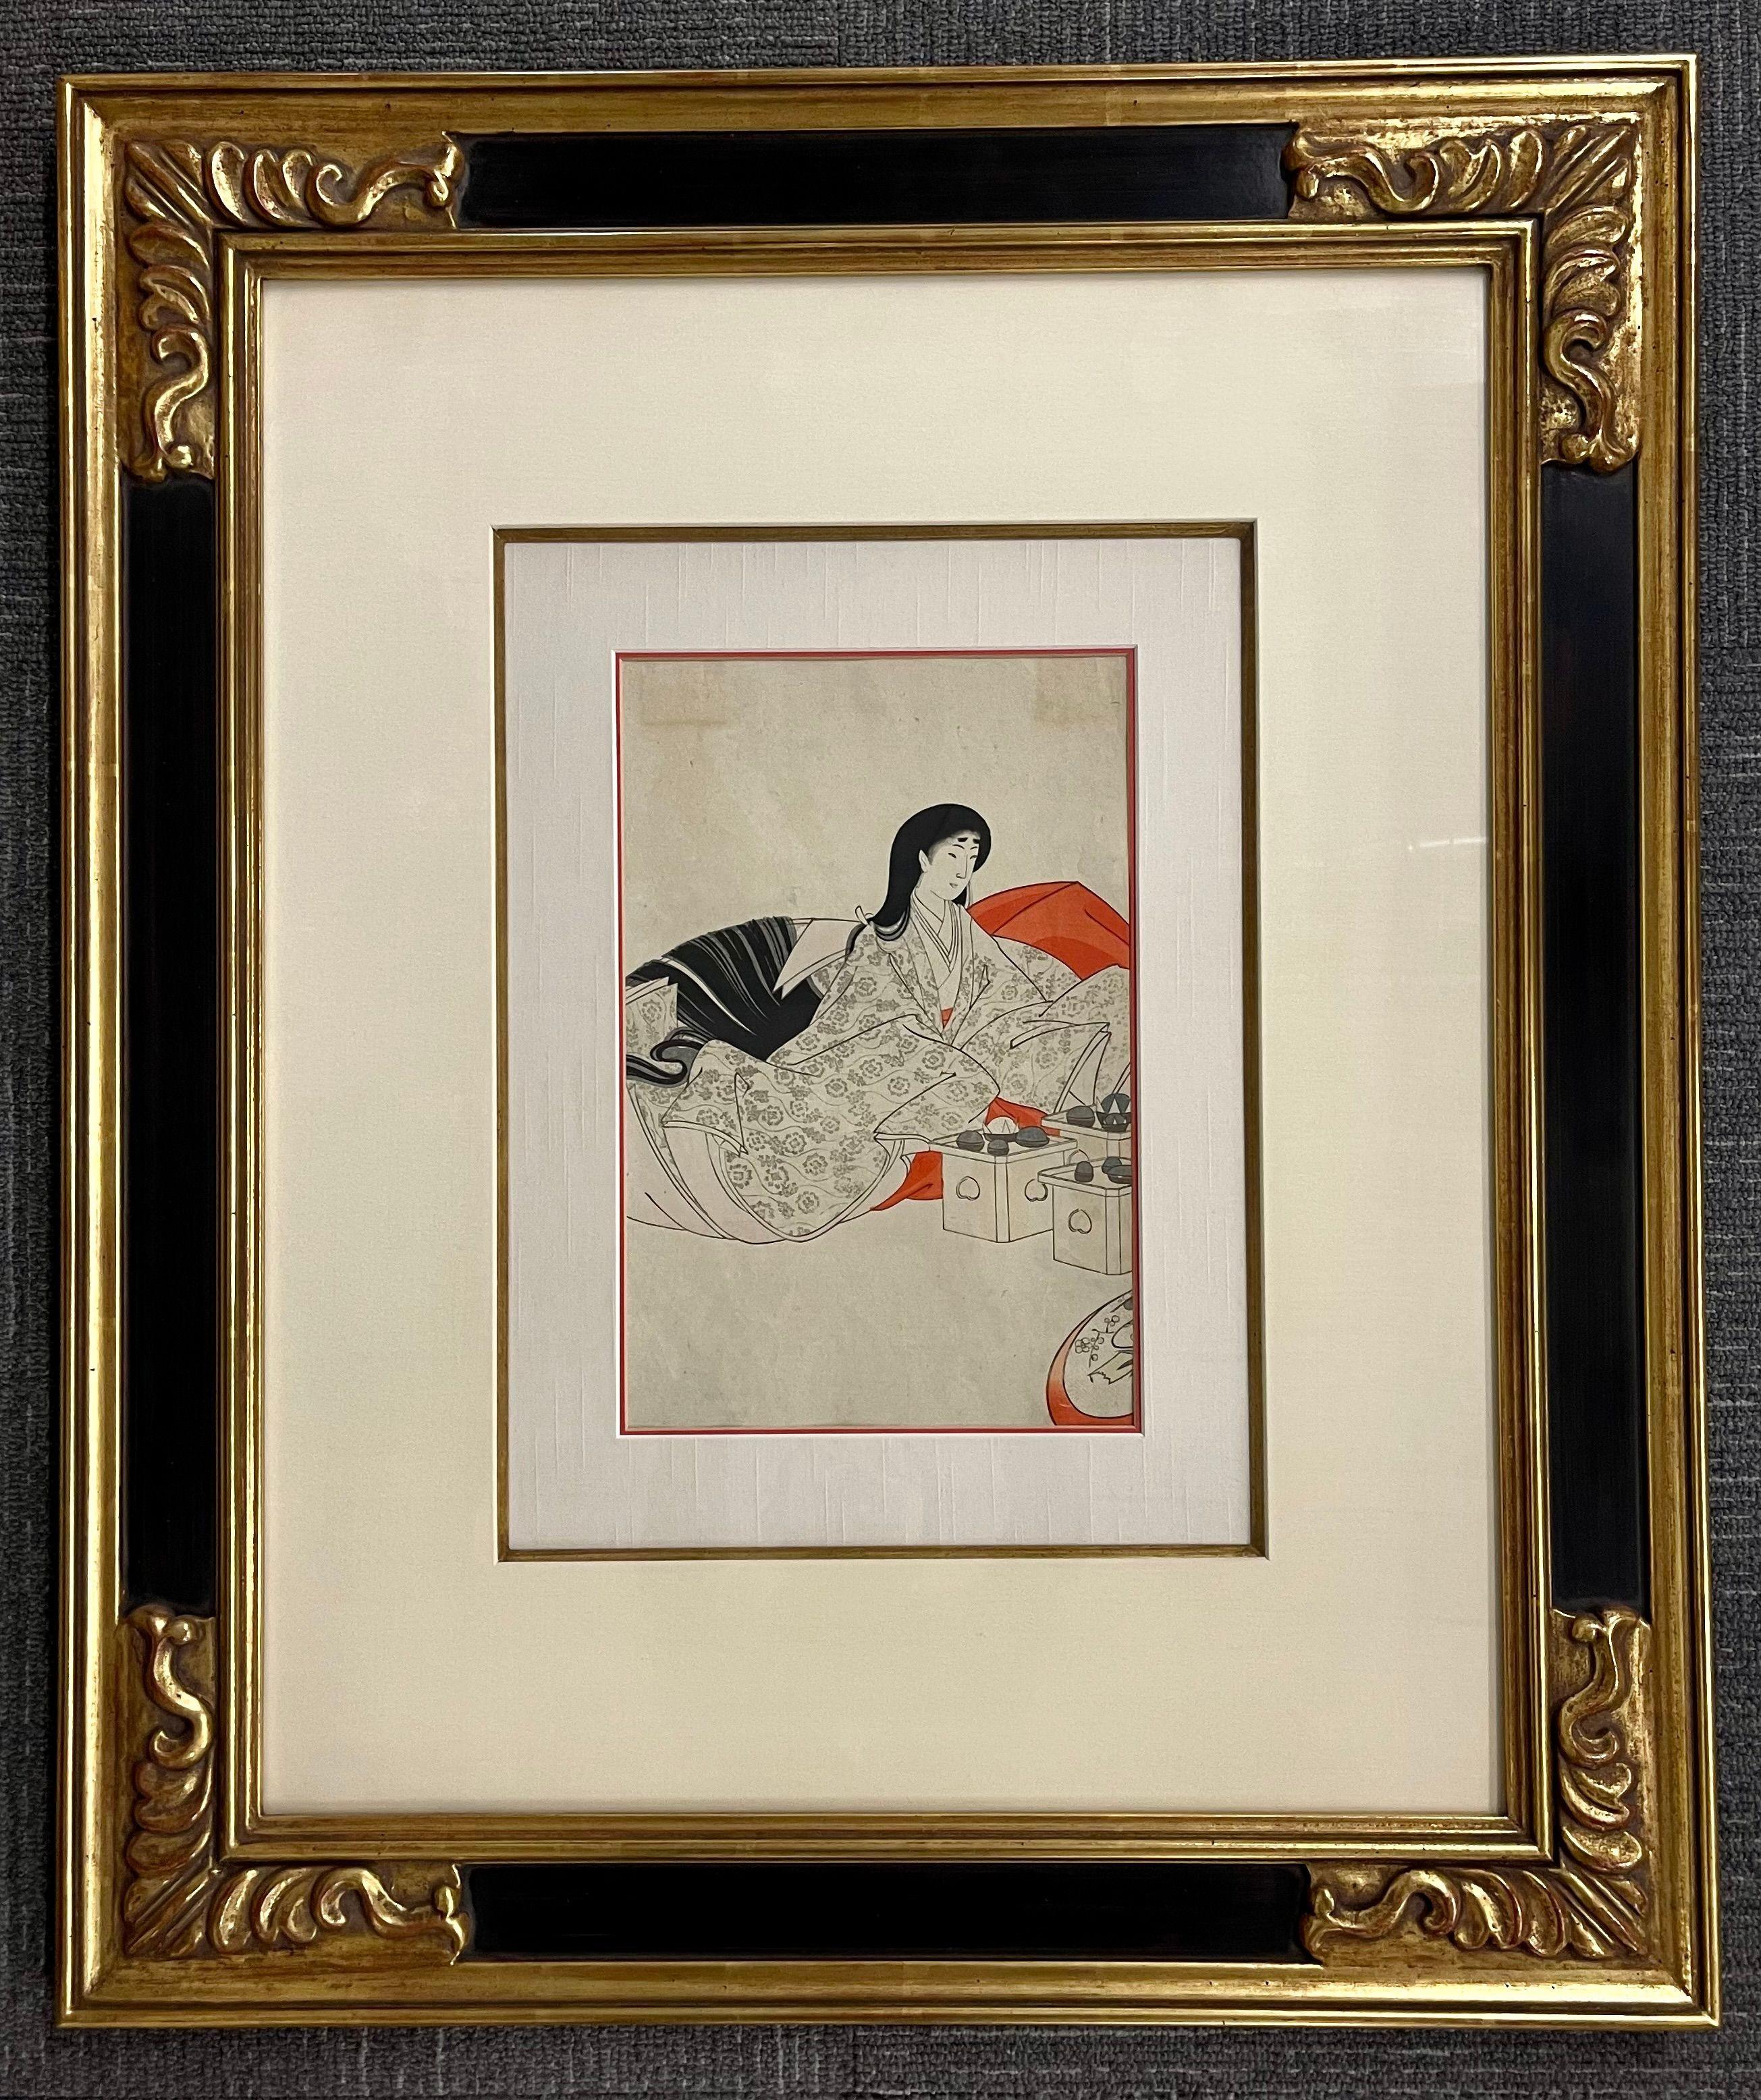 A pair of Japanese Woodblocks each in a fine custom matted frame with fine ebony and gilt decorations. Each signed and dated on the reverse. Listed below.
-A courtyard lady in a commercial robe. By: Chikanobu Printed 1893
-Three court ladies in a